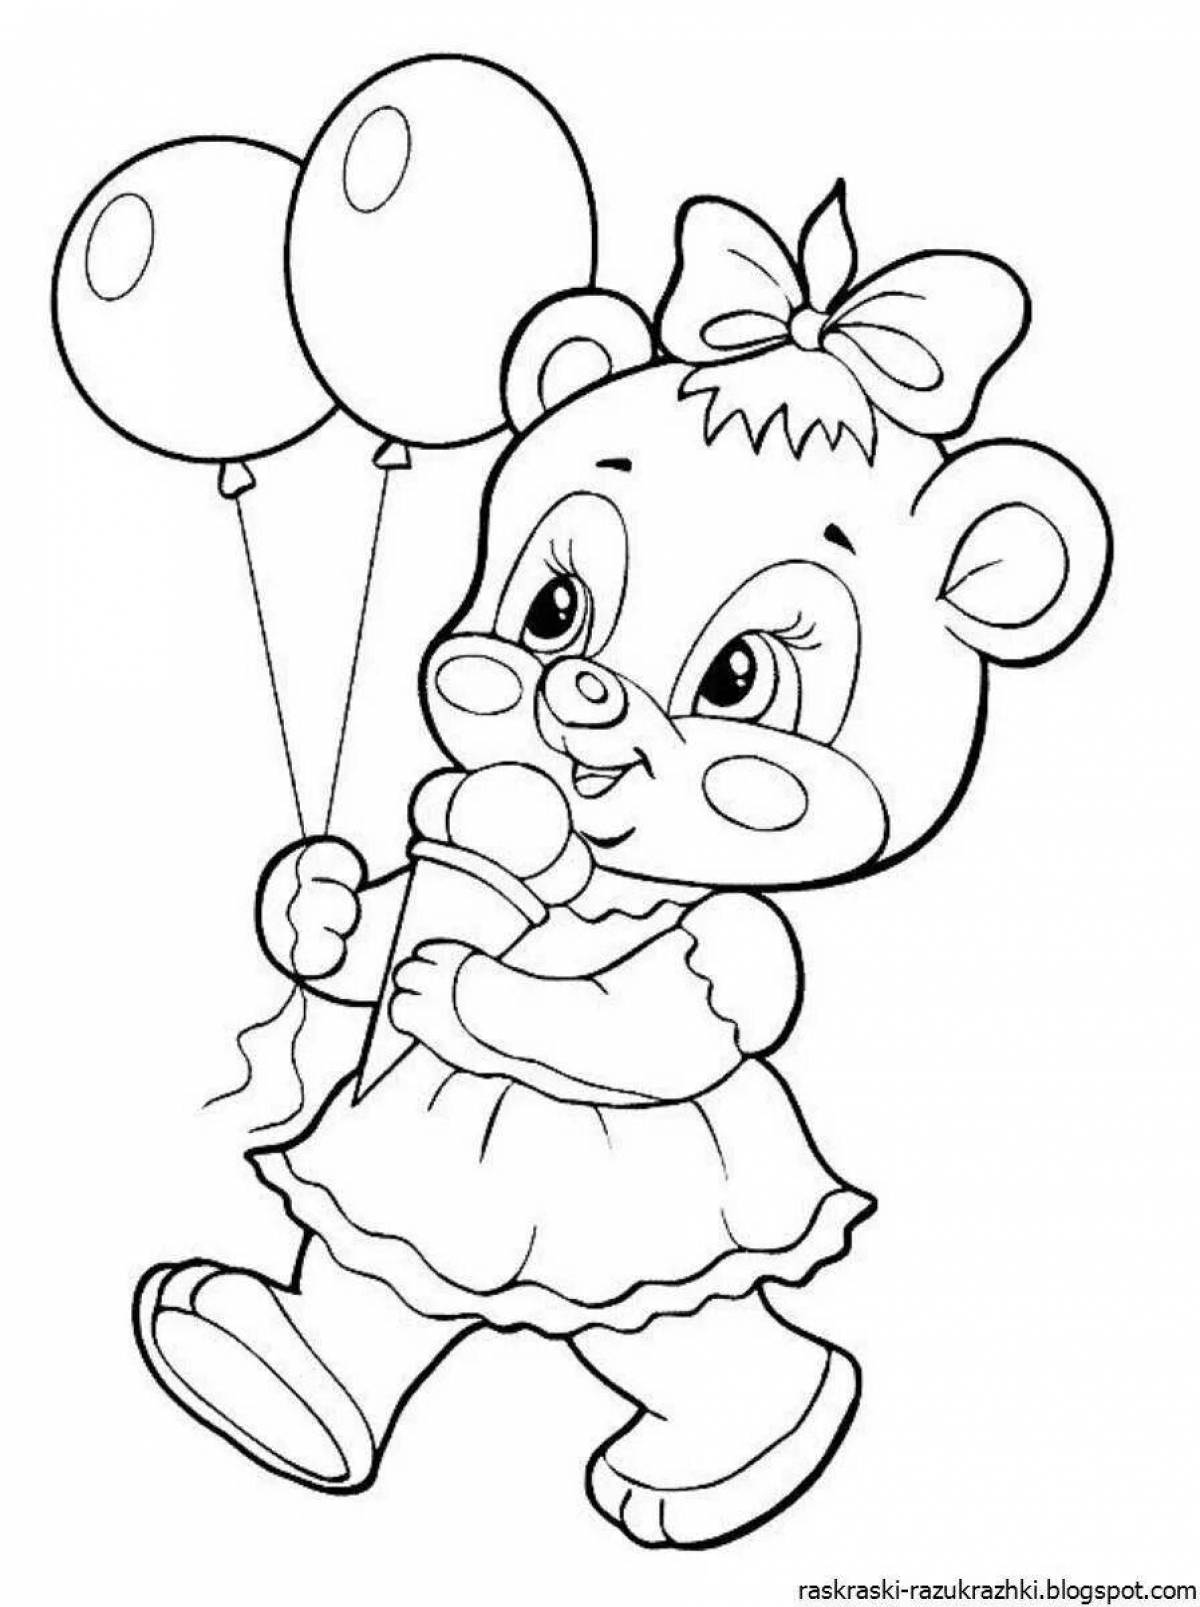 Adorable teddy bear coloring book for 5-6 year olds